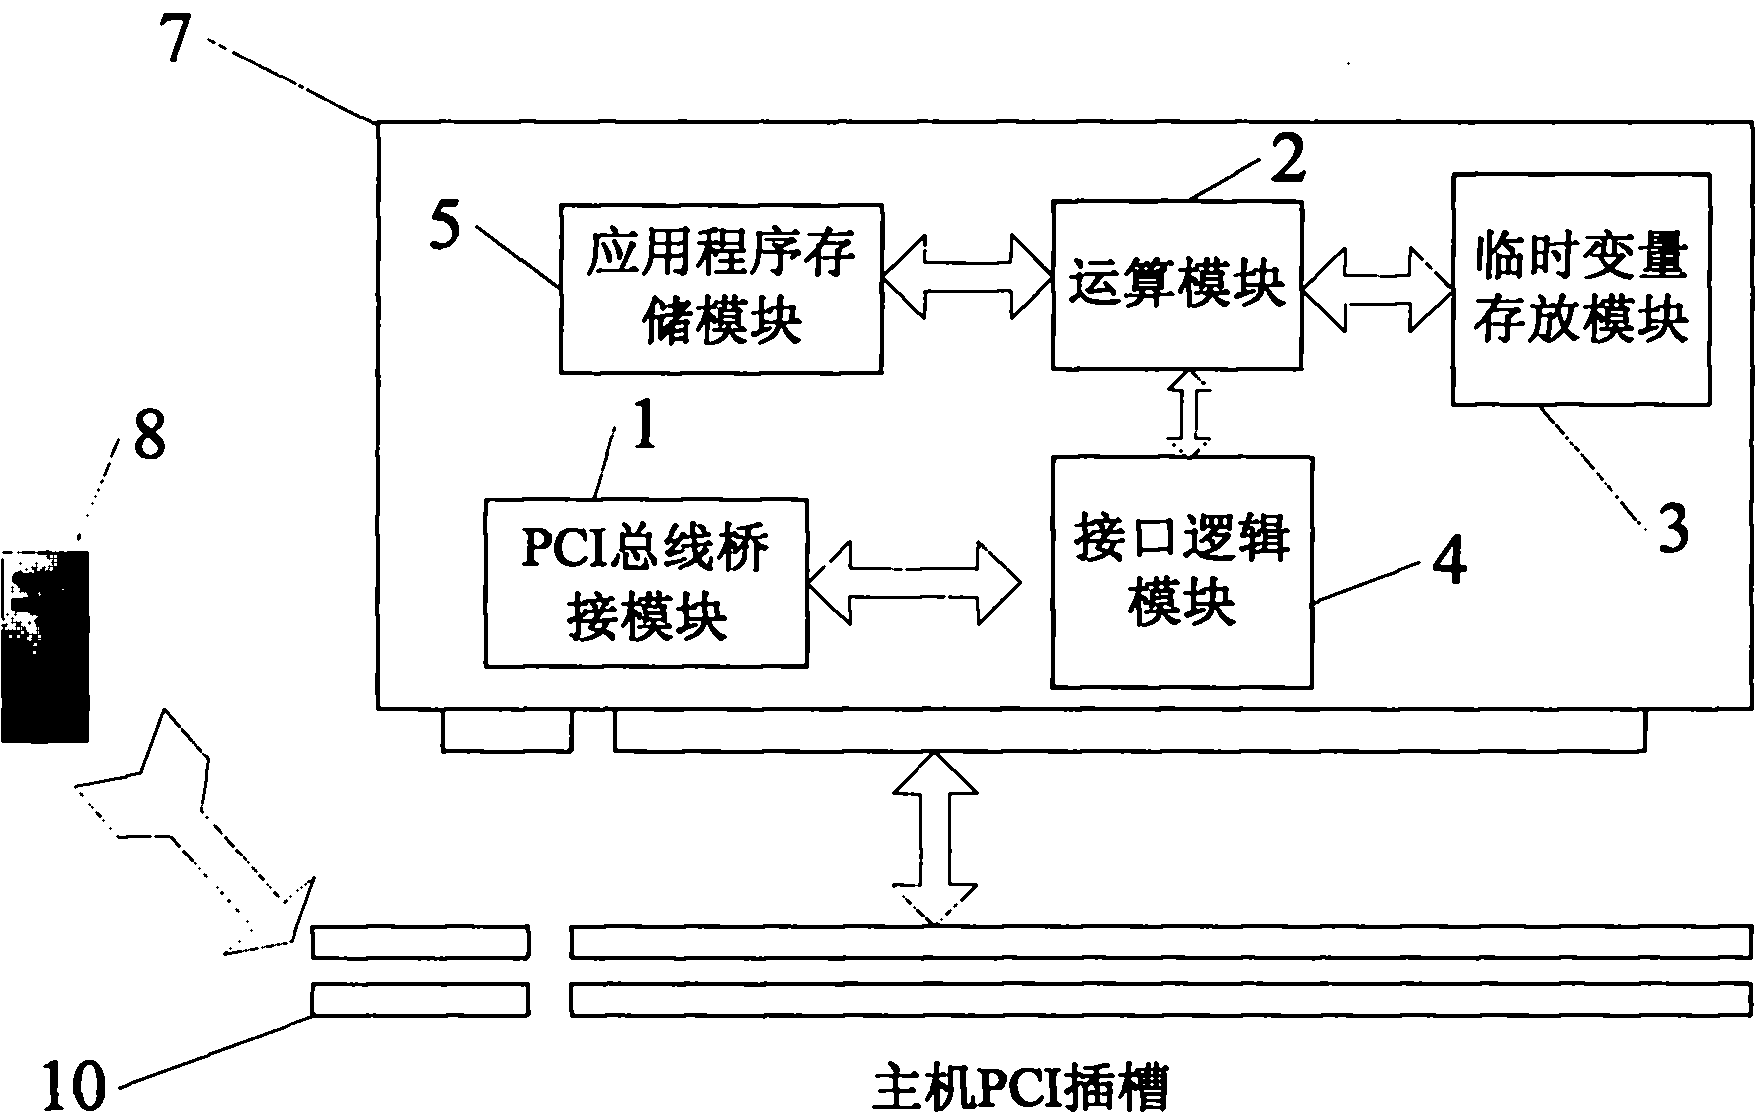 FPGA (Field Programmable Gate Array) high-performance operating PCI (Peripheral Component Interconnect) card